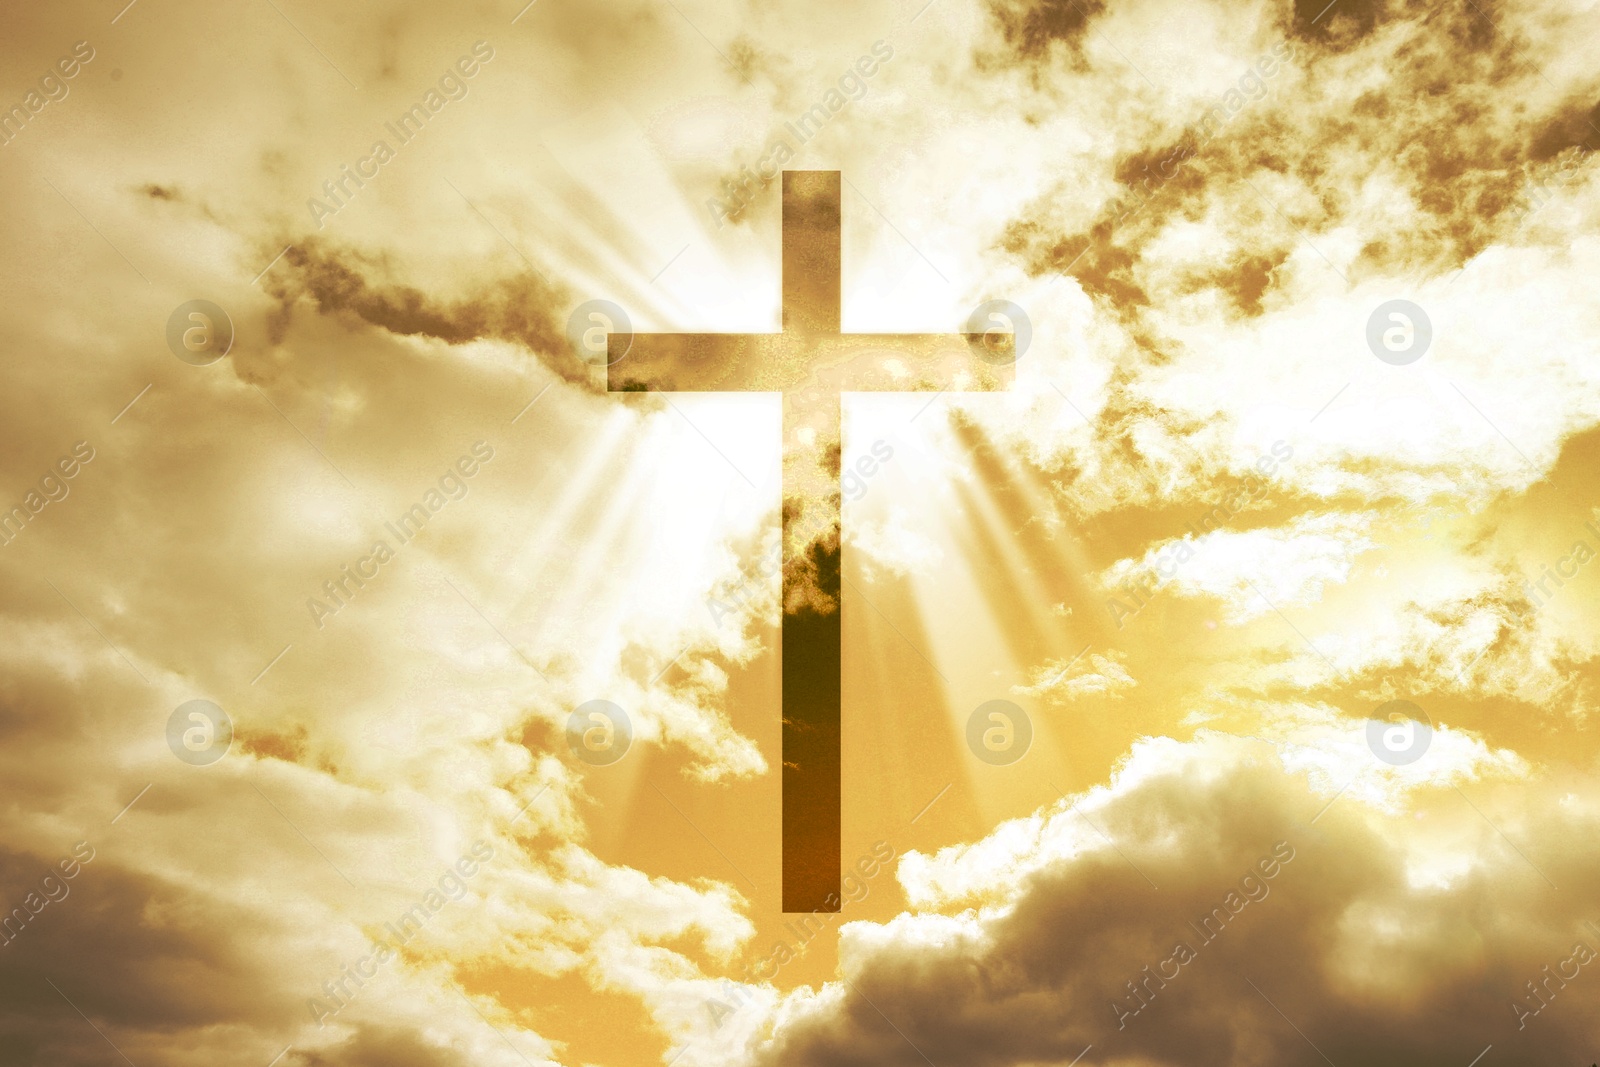 Image of Cross lit by sunlight in sky, double exposure. Religion of Christianity